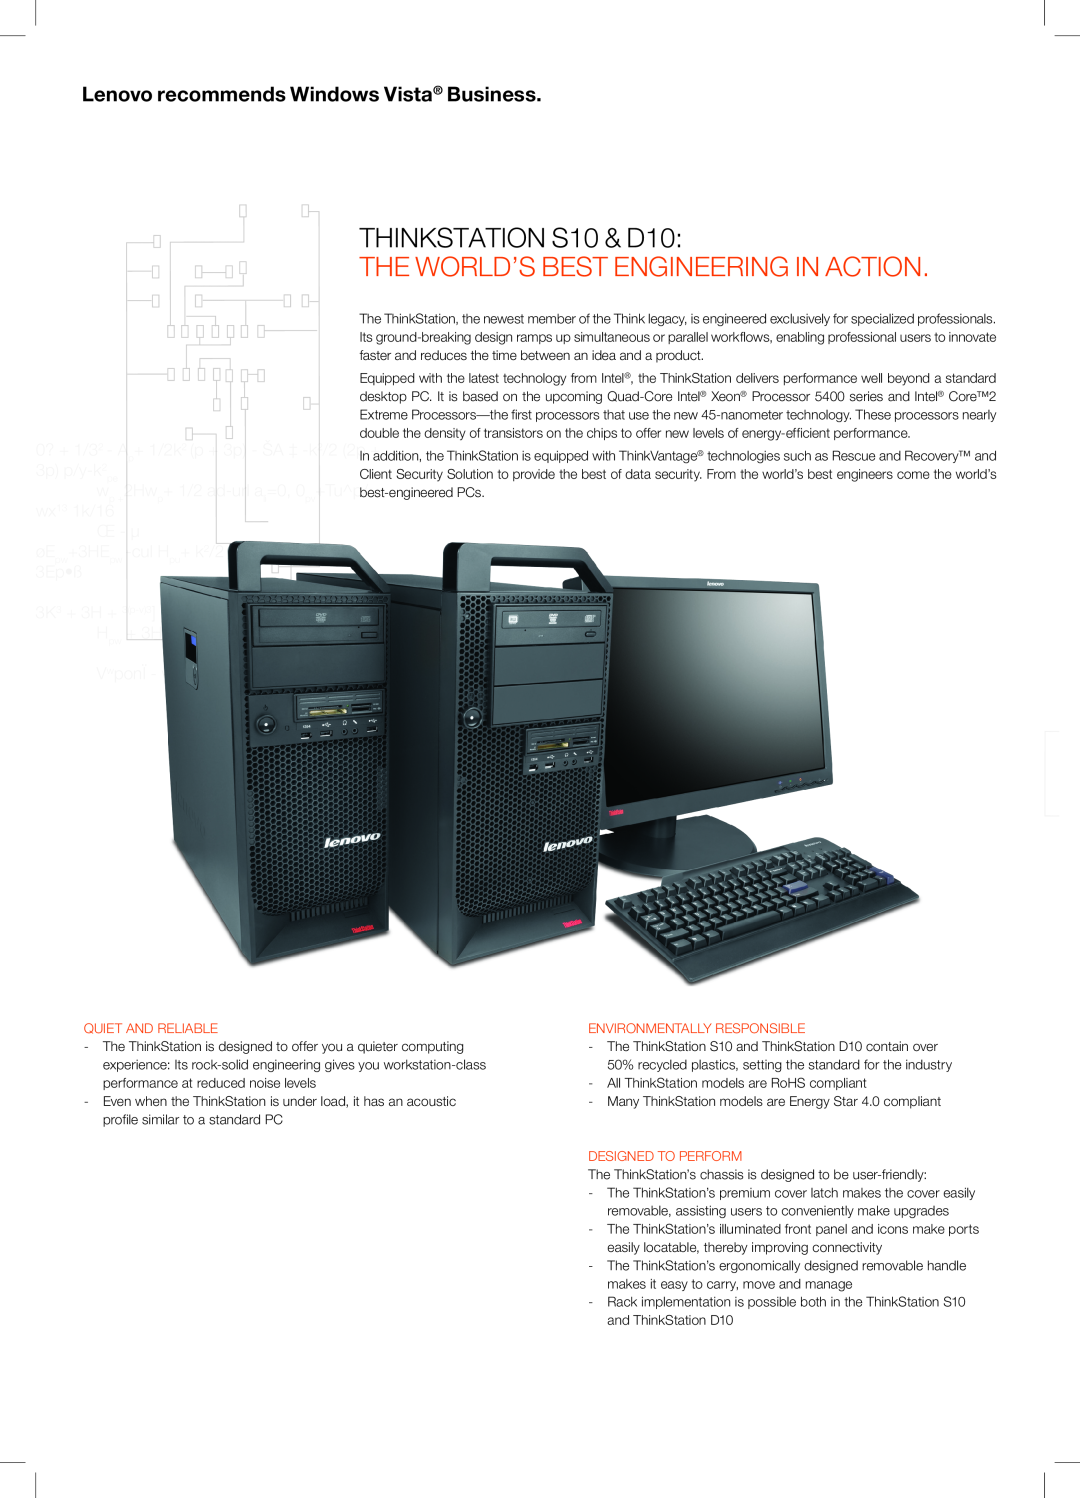 Lenovo manual ThinkStation S10 & D10, The world’s best engineering in action, Lenovo recommends Windows Vista Business 